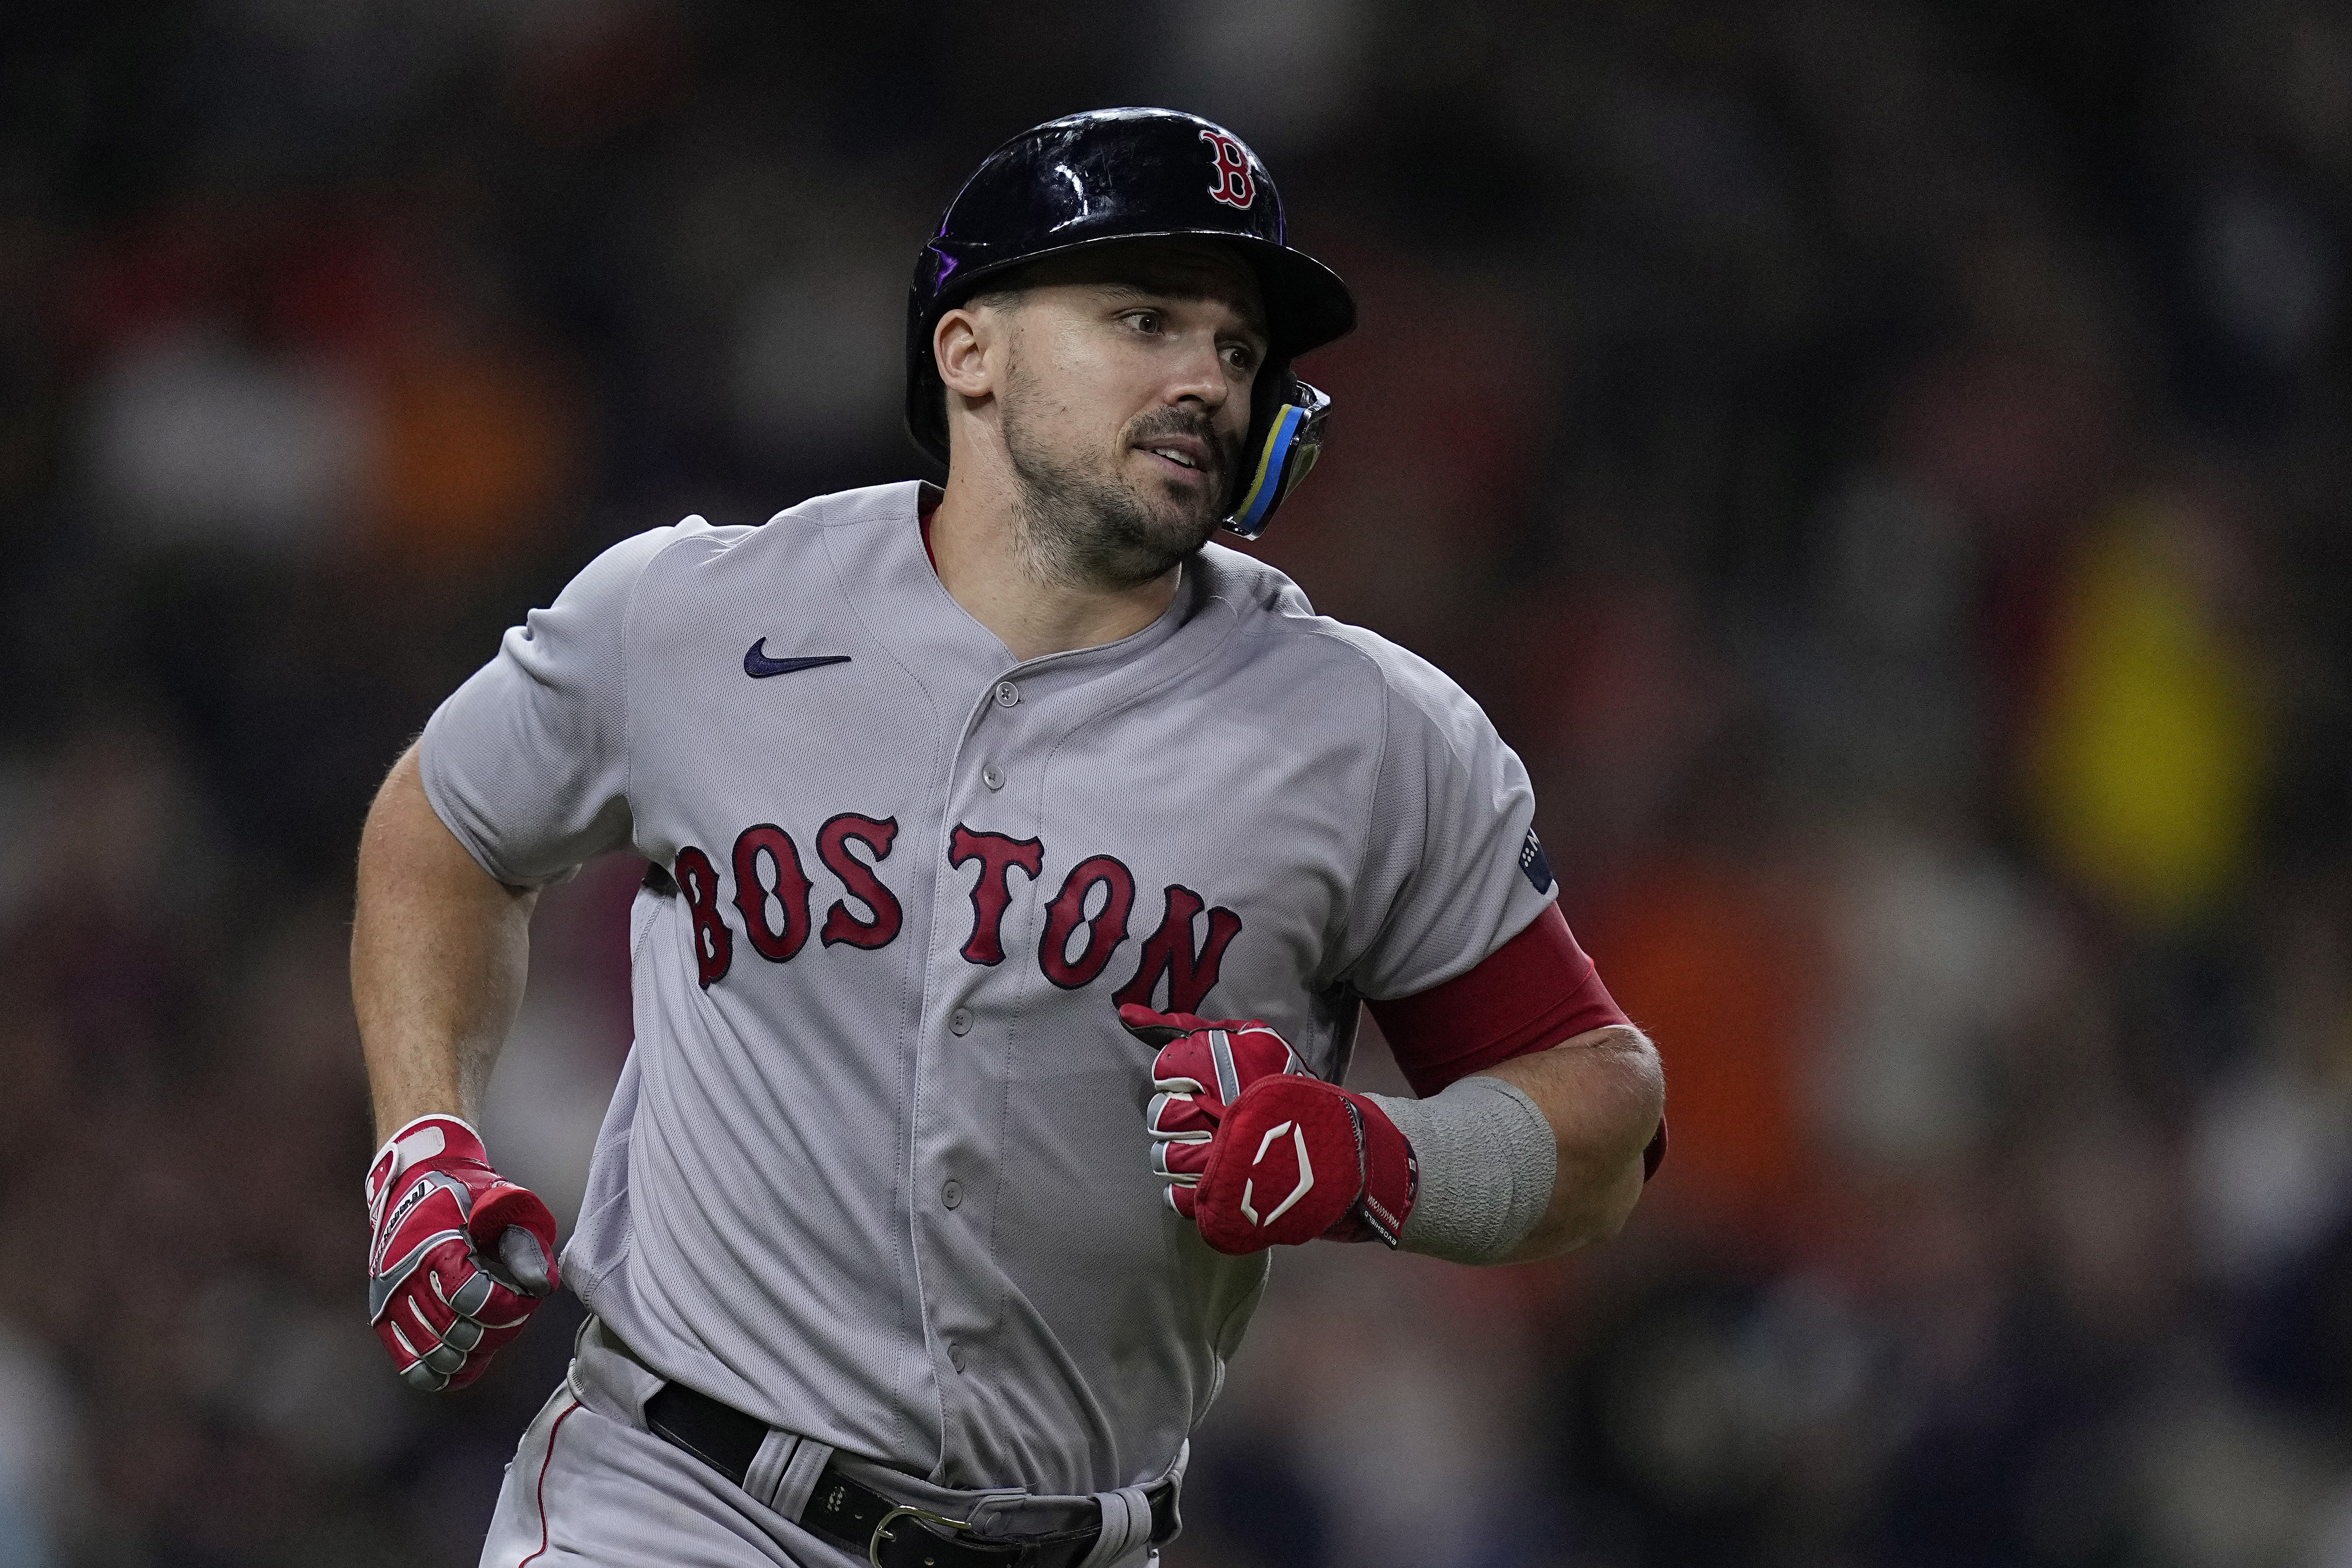 Duvall's 3-run homer helps lifts Red Sox past Dodgers